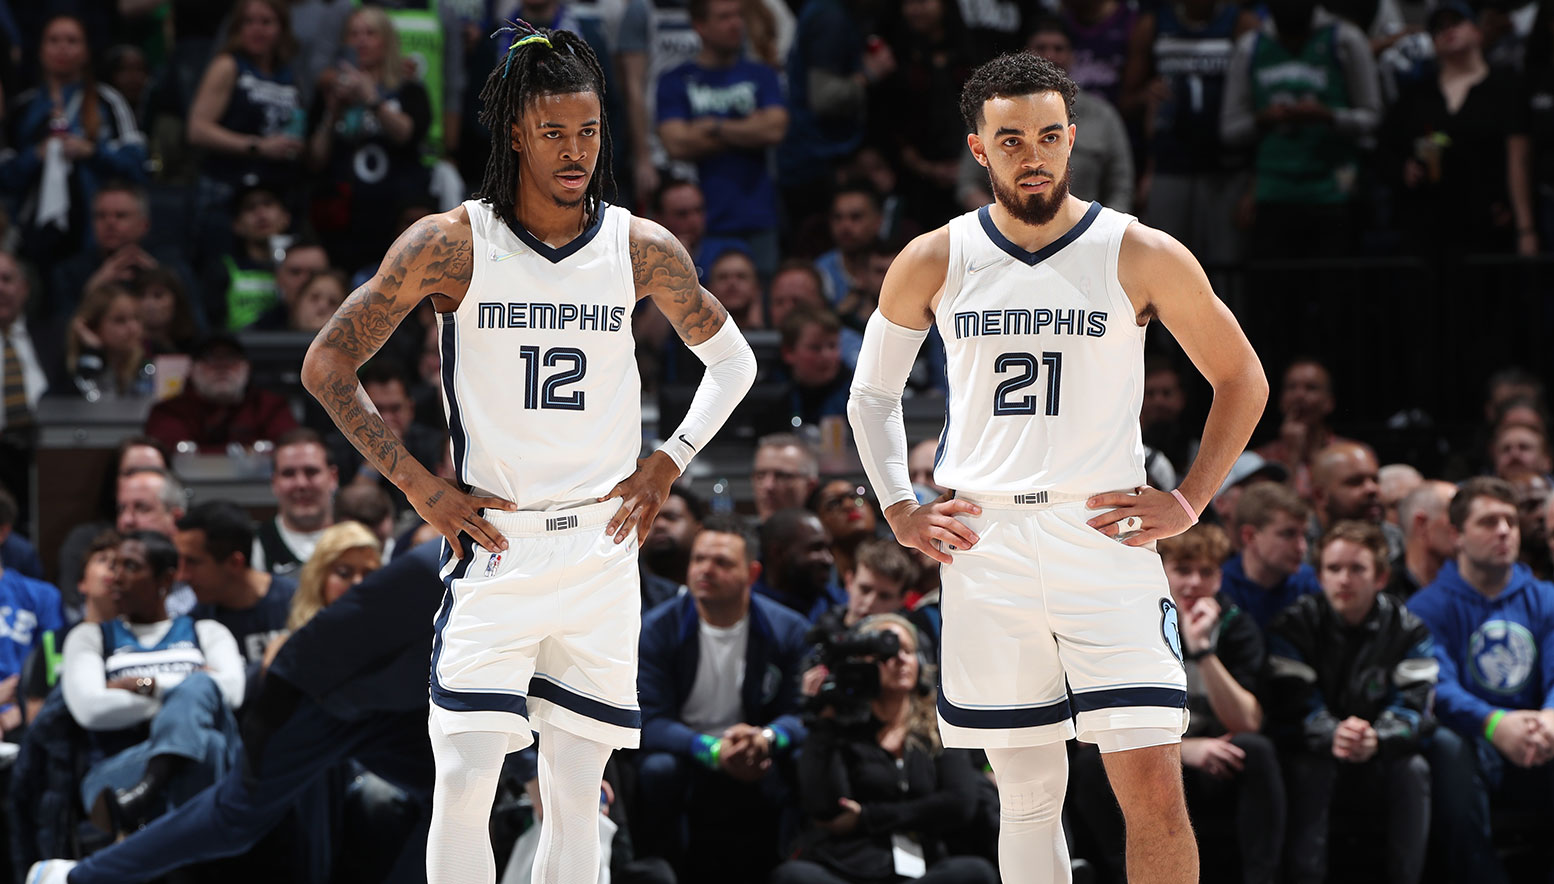 MINNEAPOLIS, MN - APRIL 21: Ja Morant #12 of the Memphis Grizzlies and Tyus Jones #21 of the Memphis Grizzlies look on during Round 1 Game 3 of the 2022 NBA Playoffs on April 21, 2022 at Target Center in Minneapolis, Minnesota.